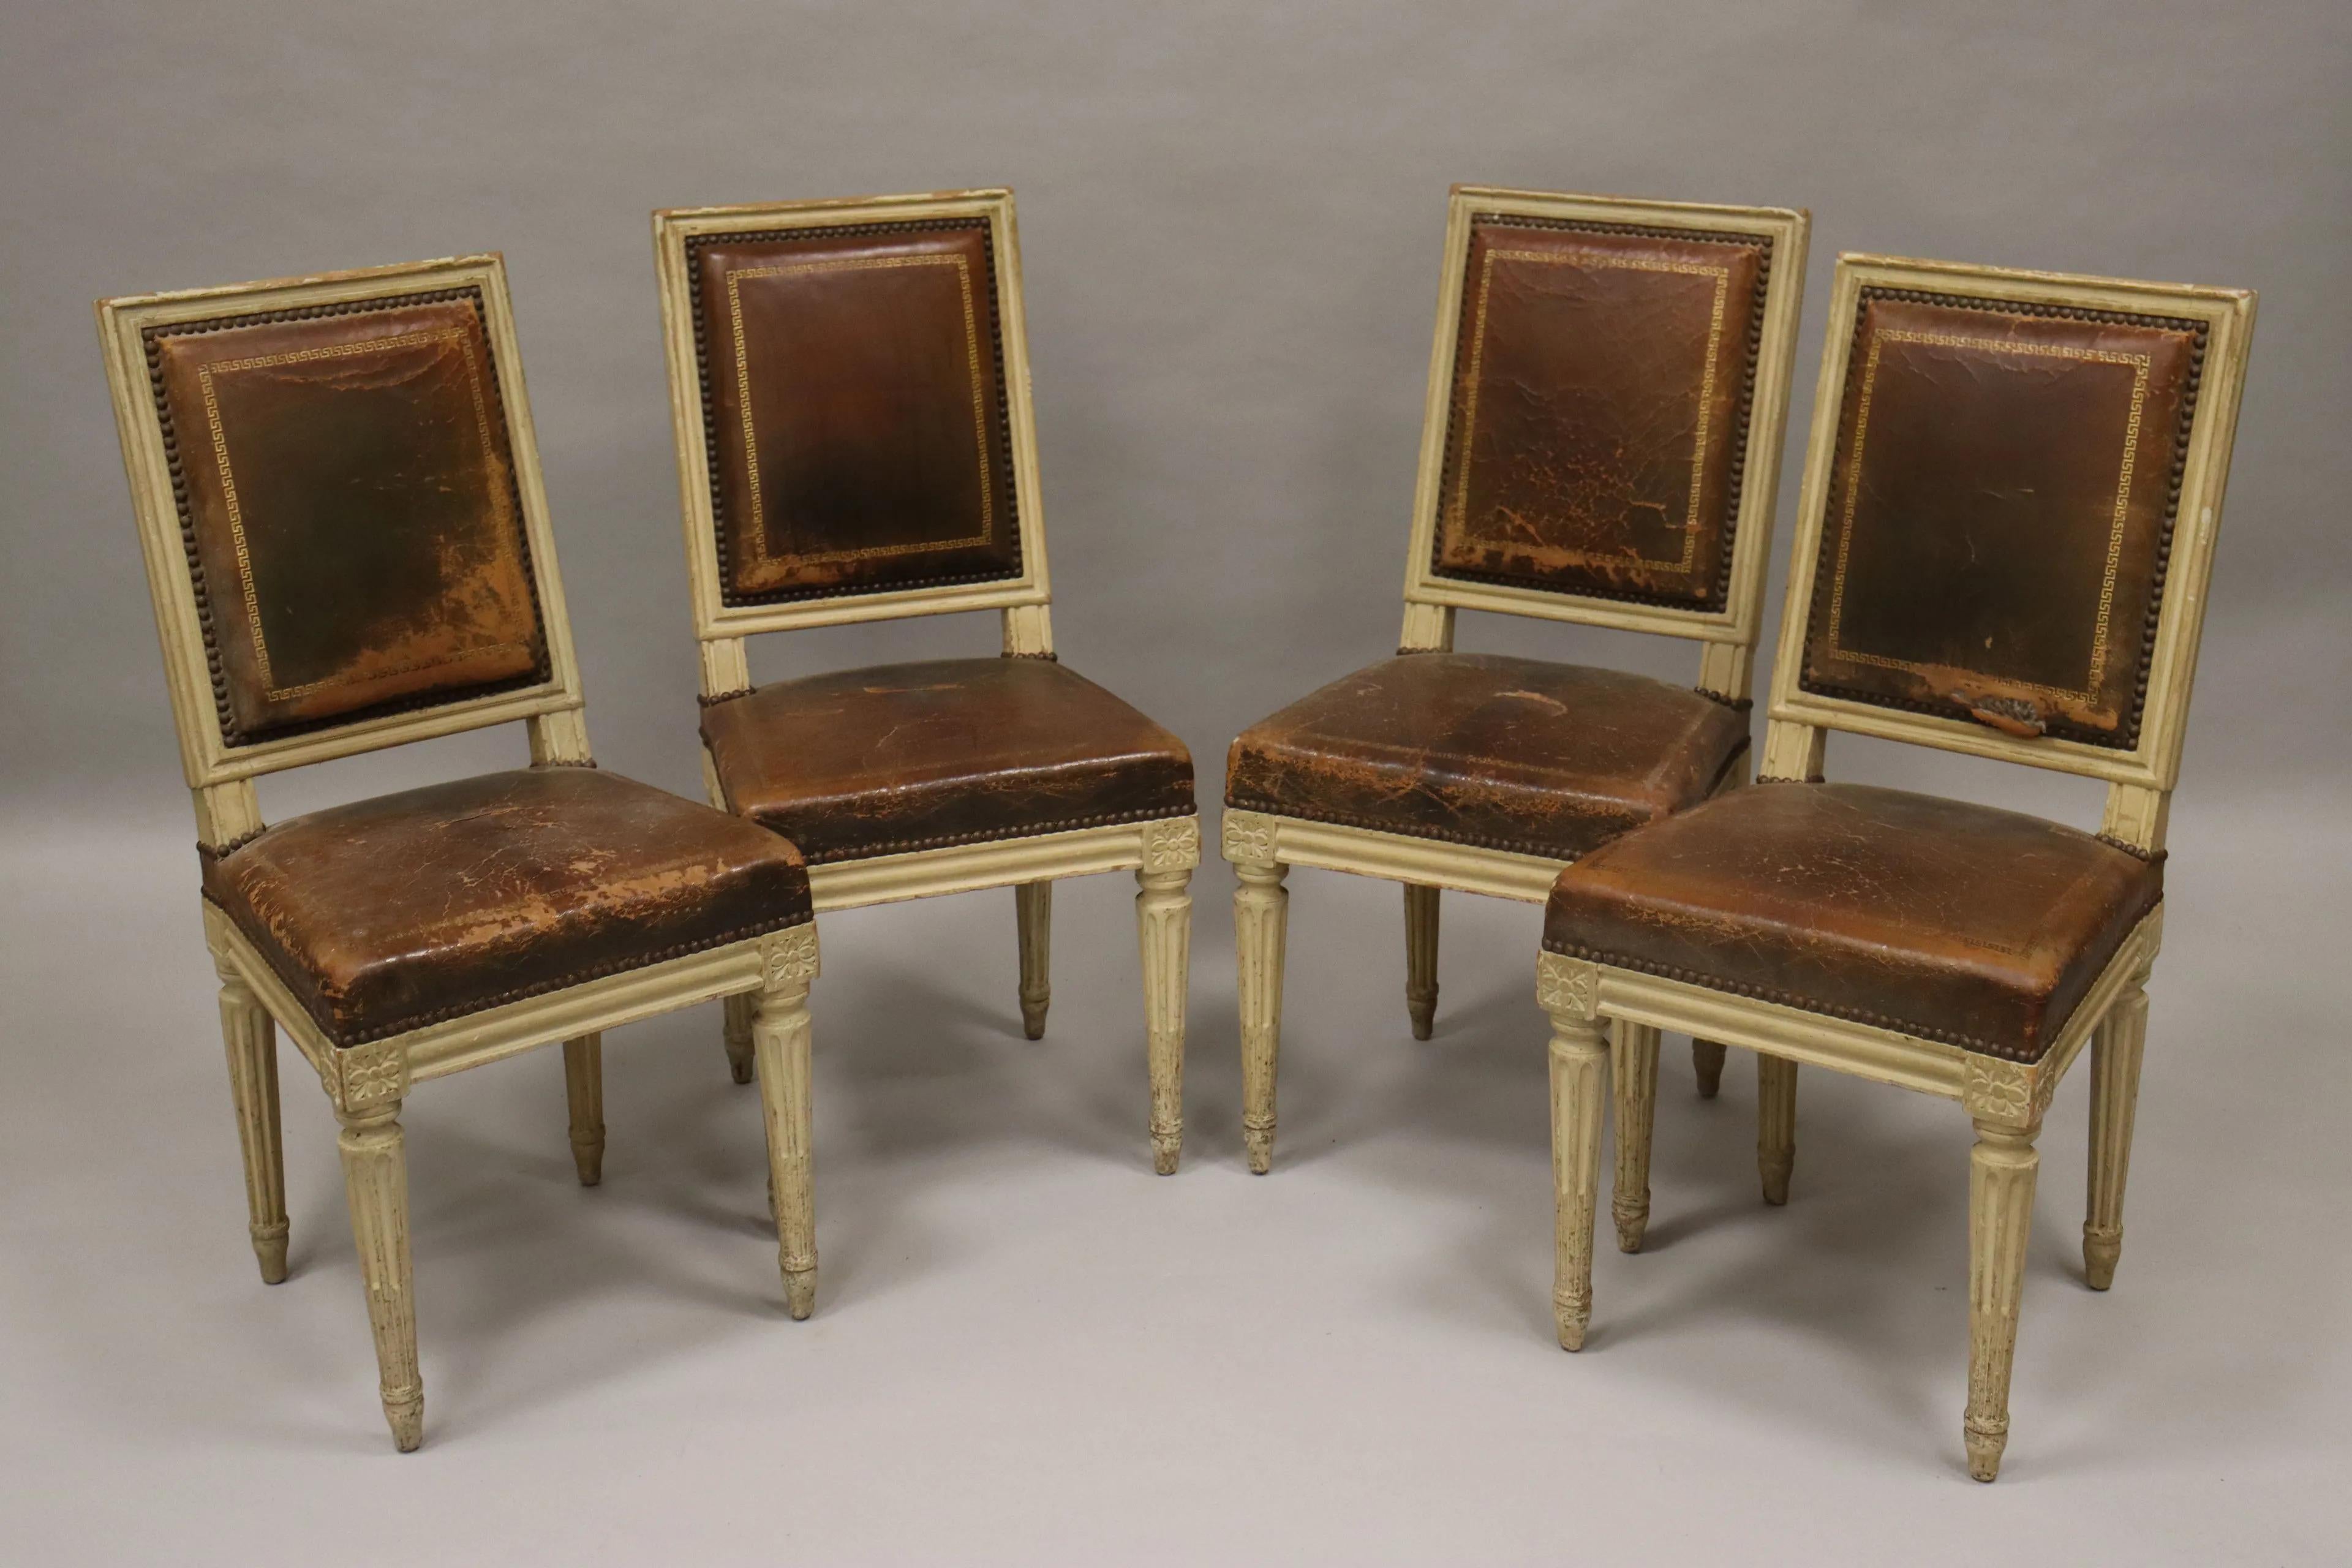 Art Deco Armand Albert Rateau Suite of Four Neo Classic Louis XVI Style Chair For Sale